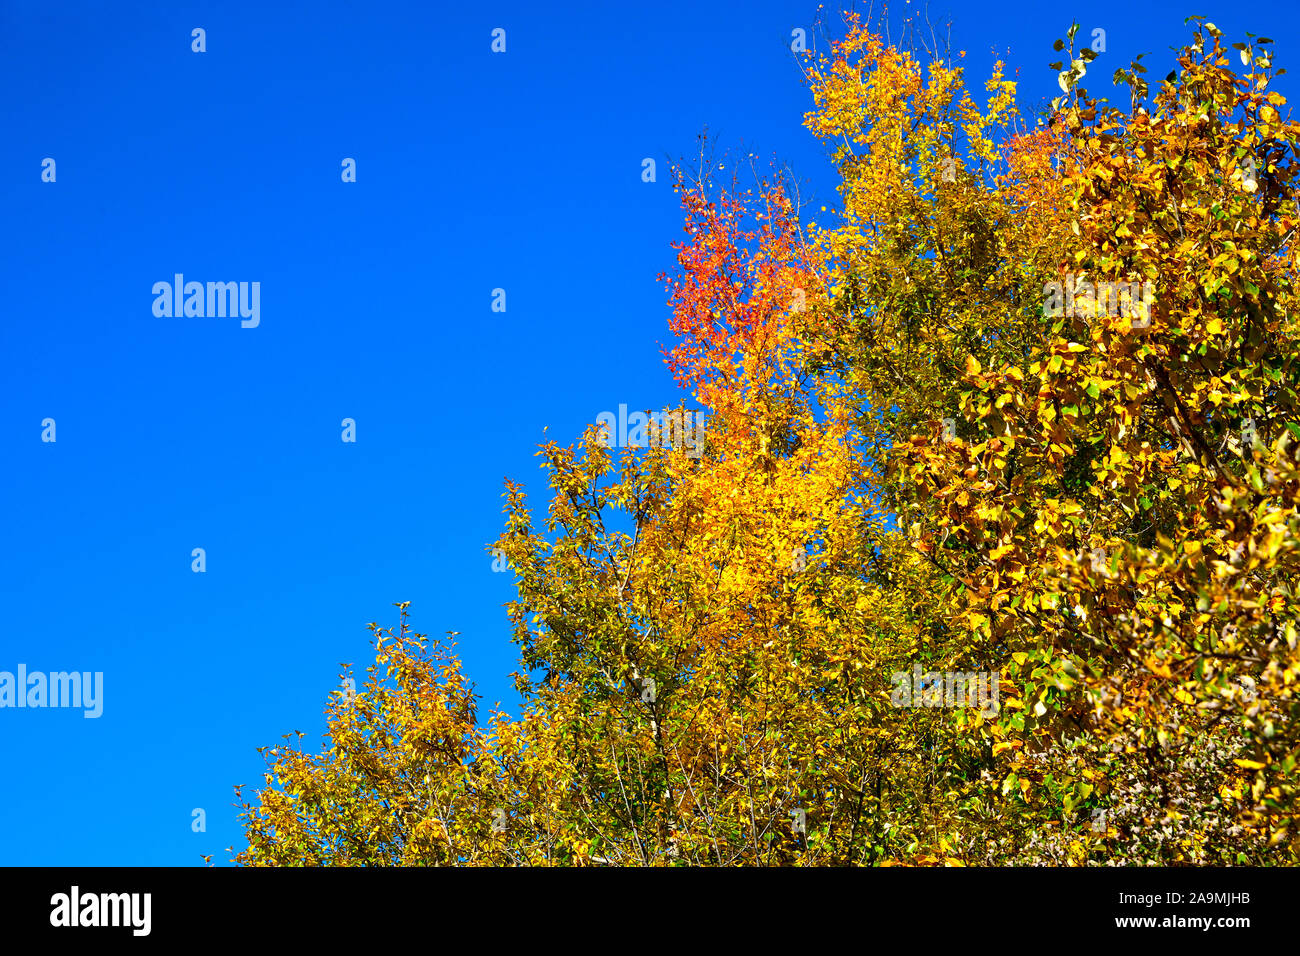 A horizontal image of aspen tree tops with their leaves turning the bright yellows and reds of autumn on a blue sky background in rural Alberta Canada Stock Photo